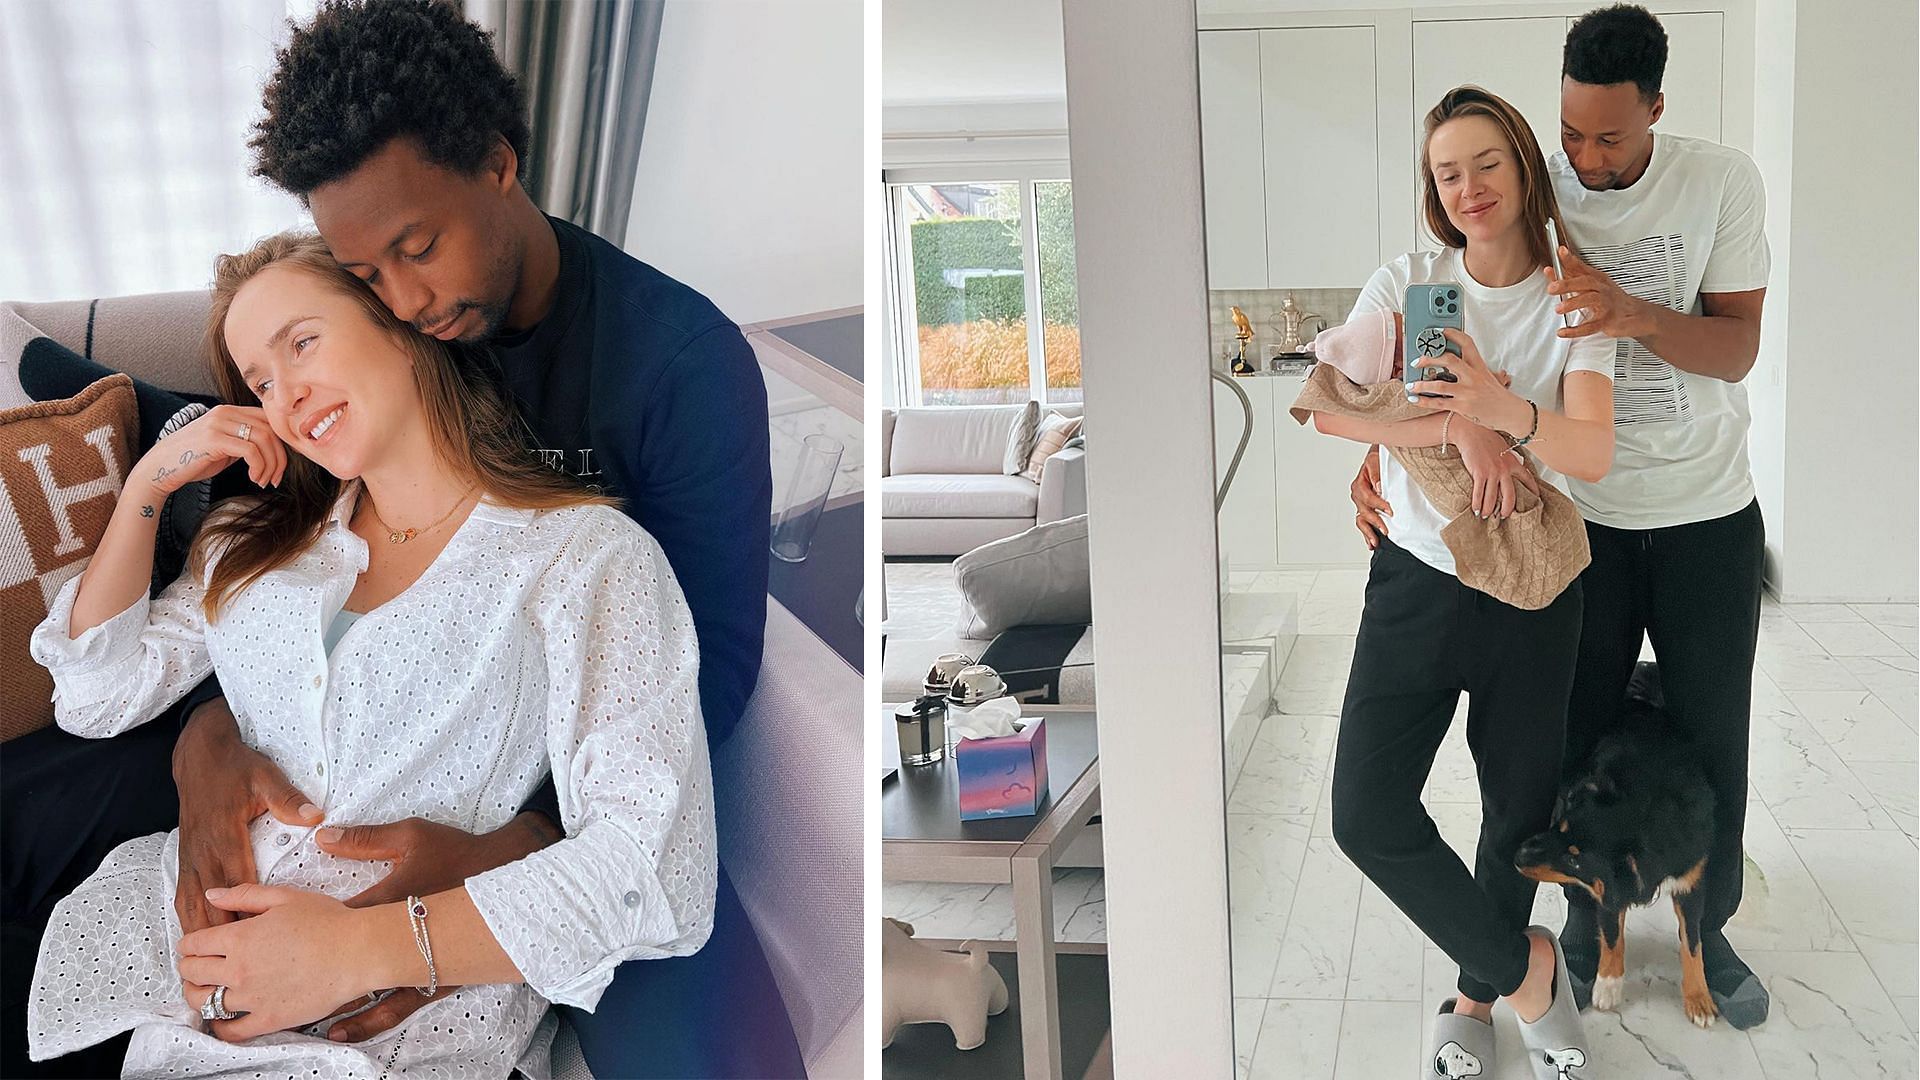 Elina Svitolina shares adorable pictures with husband Gael Monfils in new &quot;parenting&quot; role